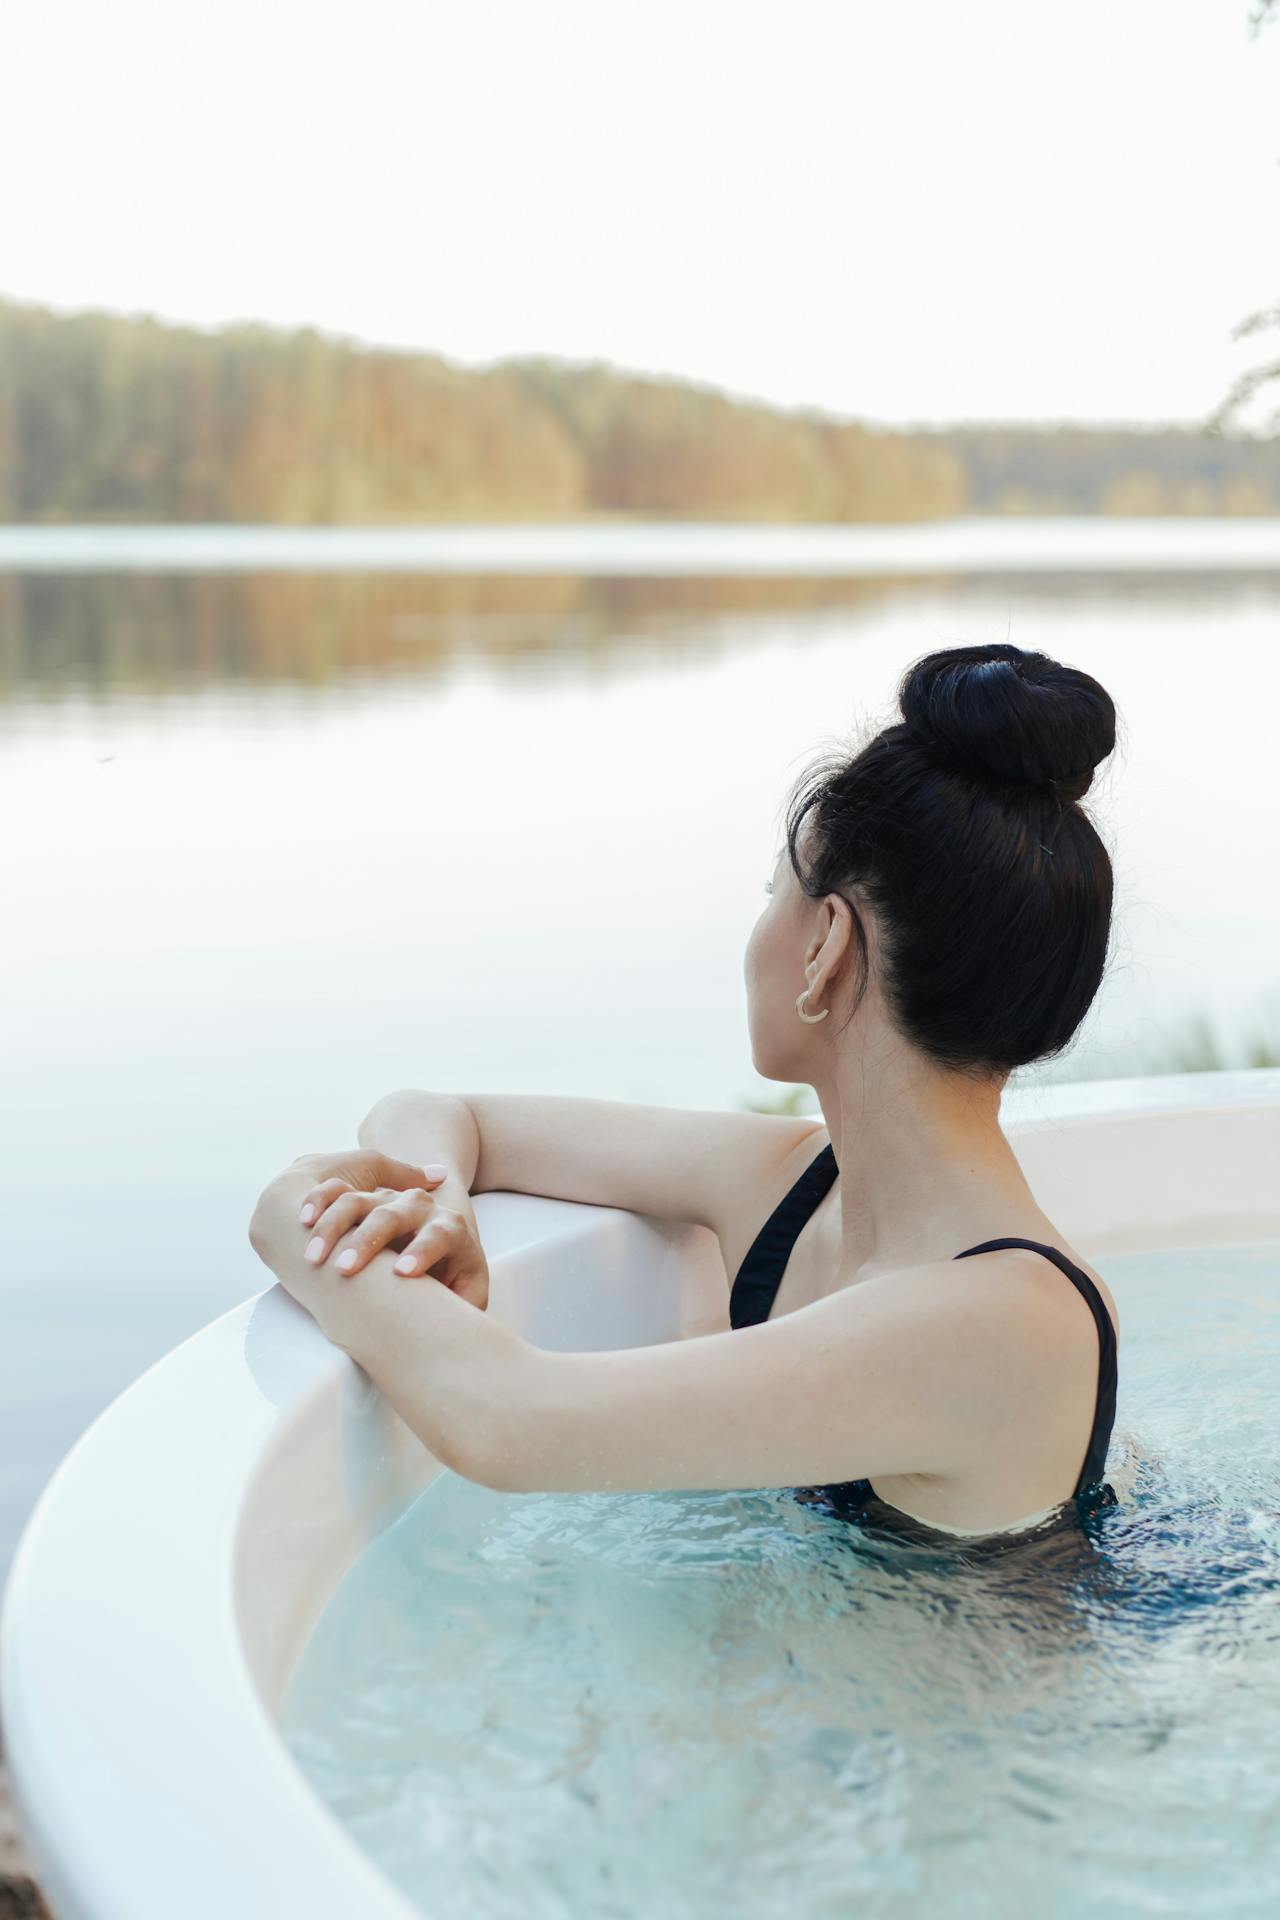 The Health Benefits of Hot Tub Use